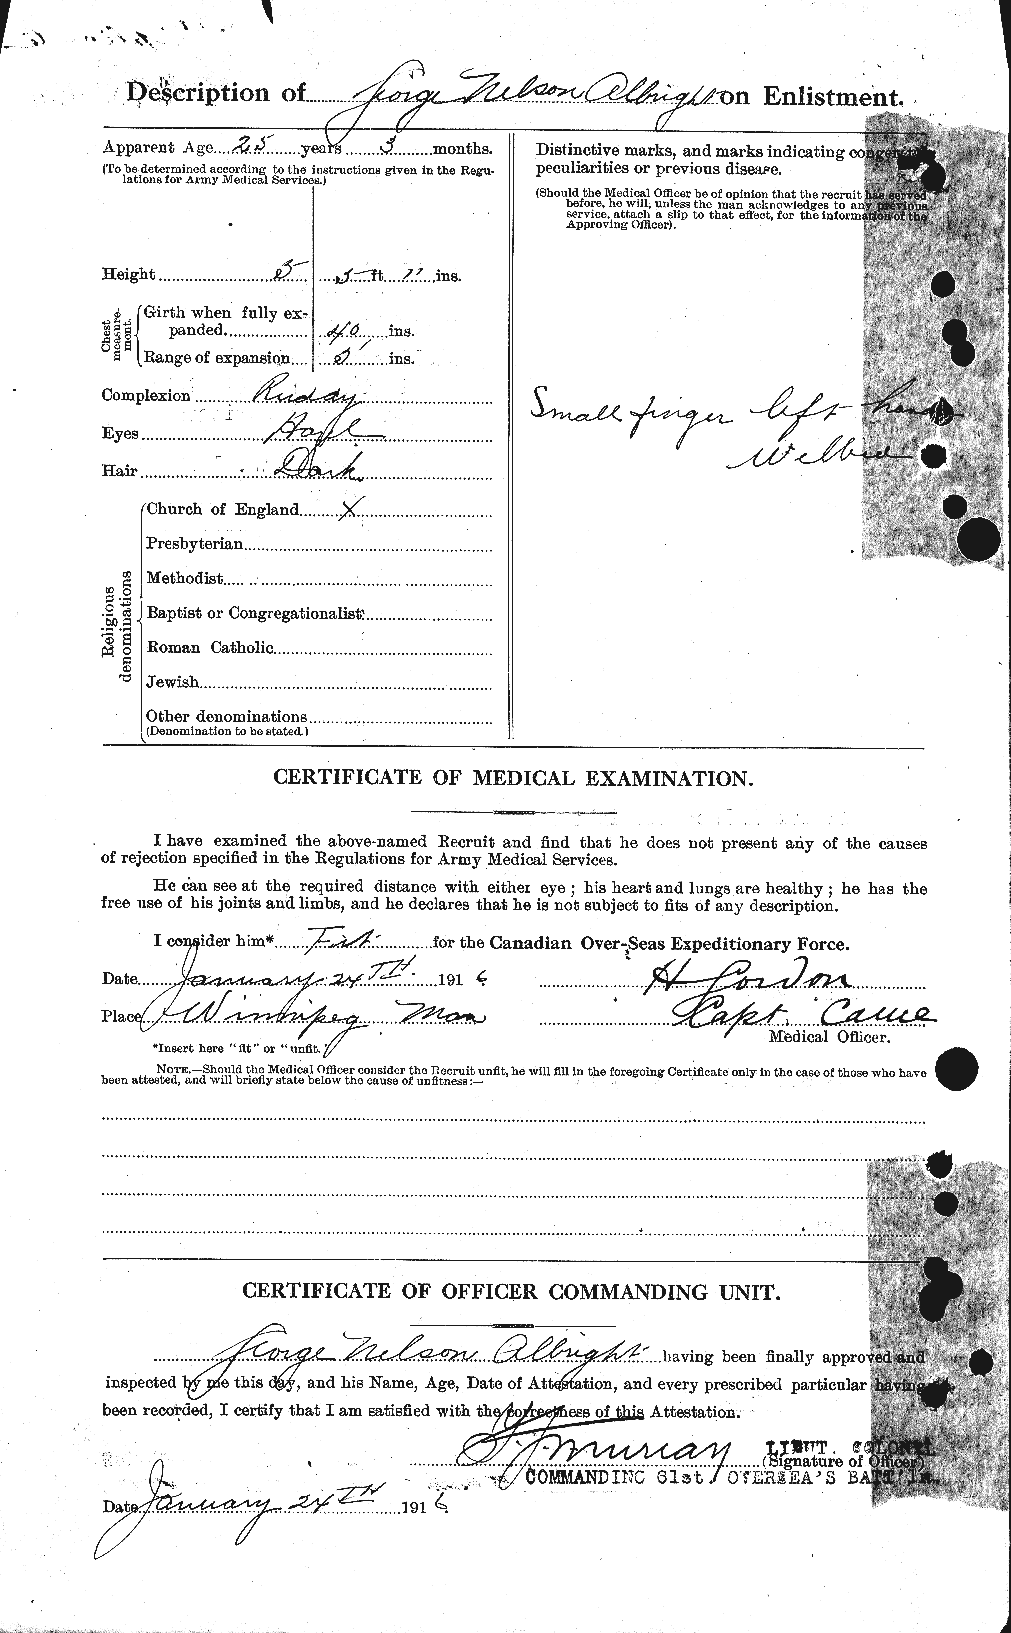 Personnel Records of the First World War - CEF 205673b